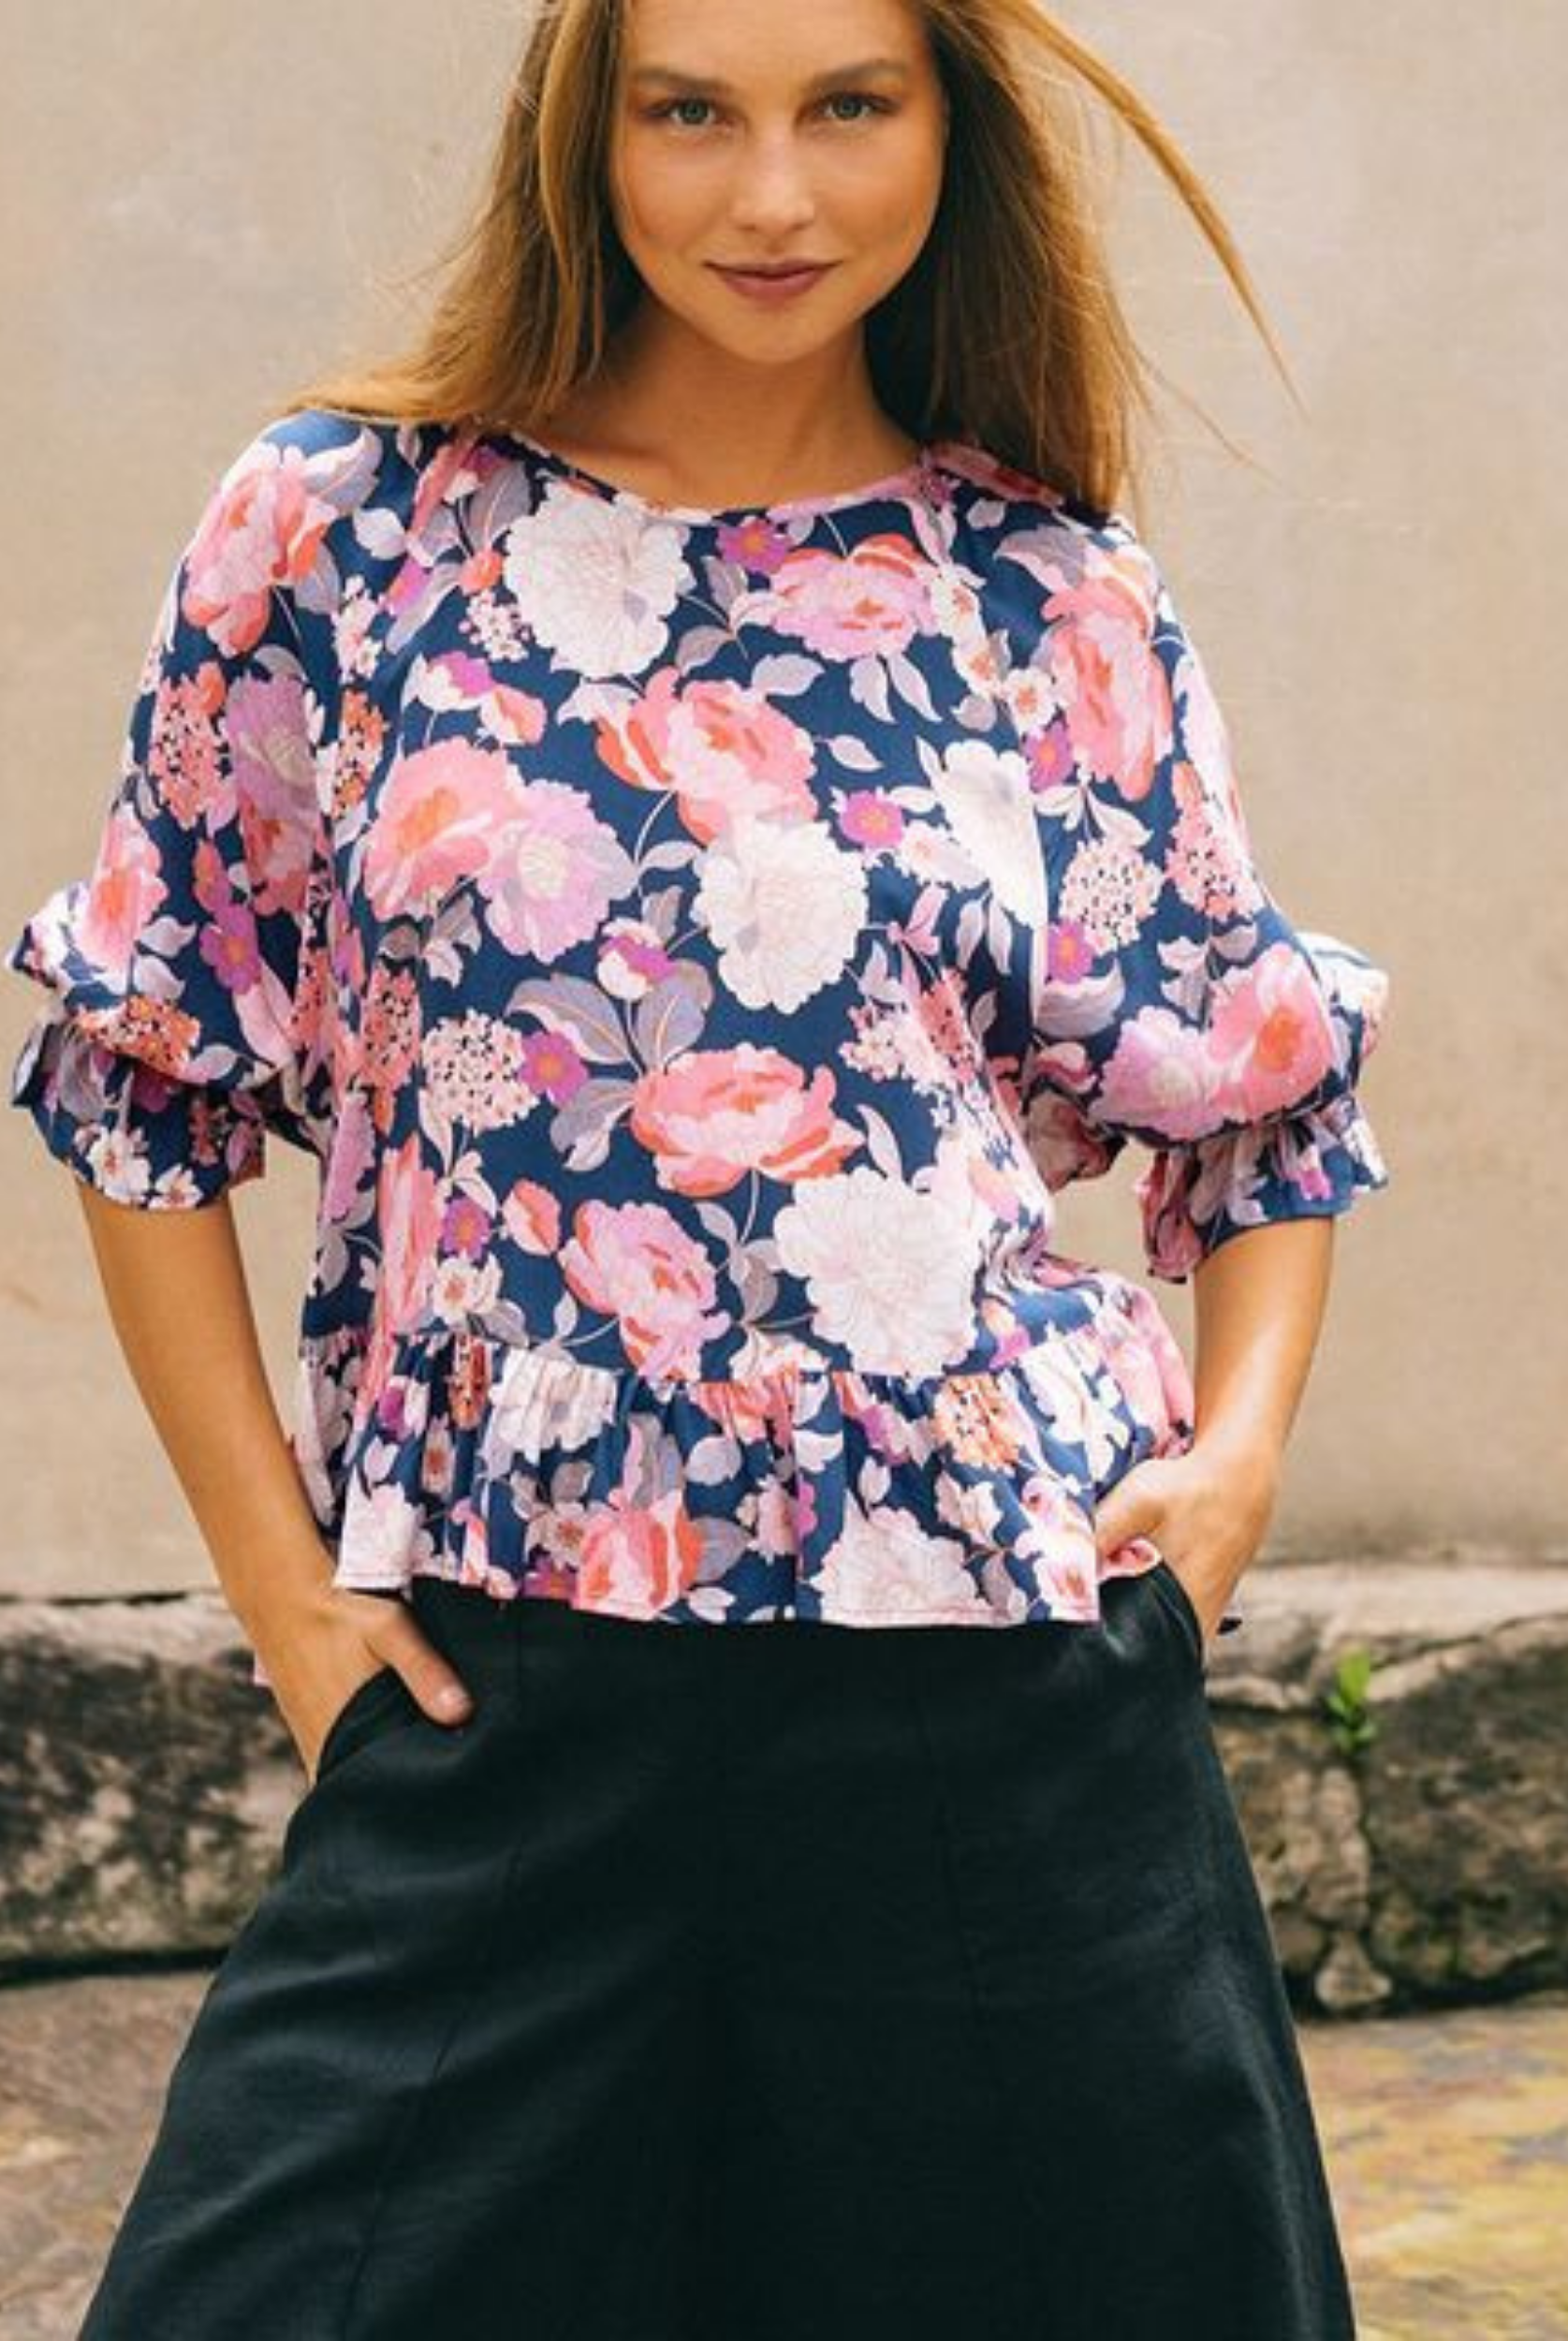 FLORAL PRINT TOP FROM EBBY AND I AUSTRALIA